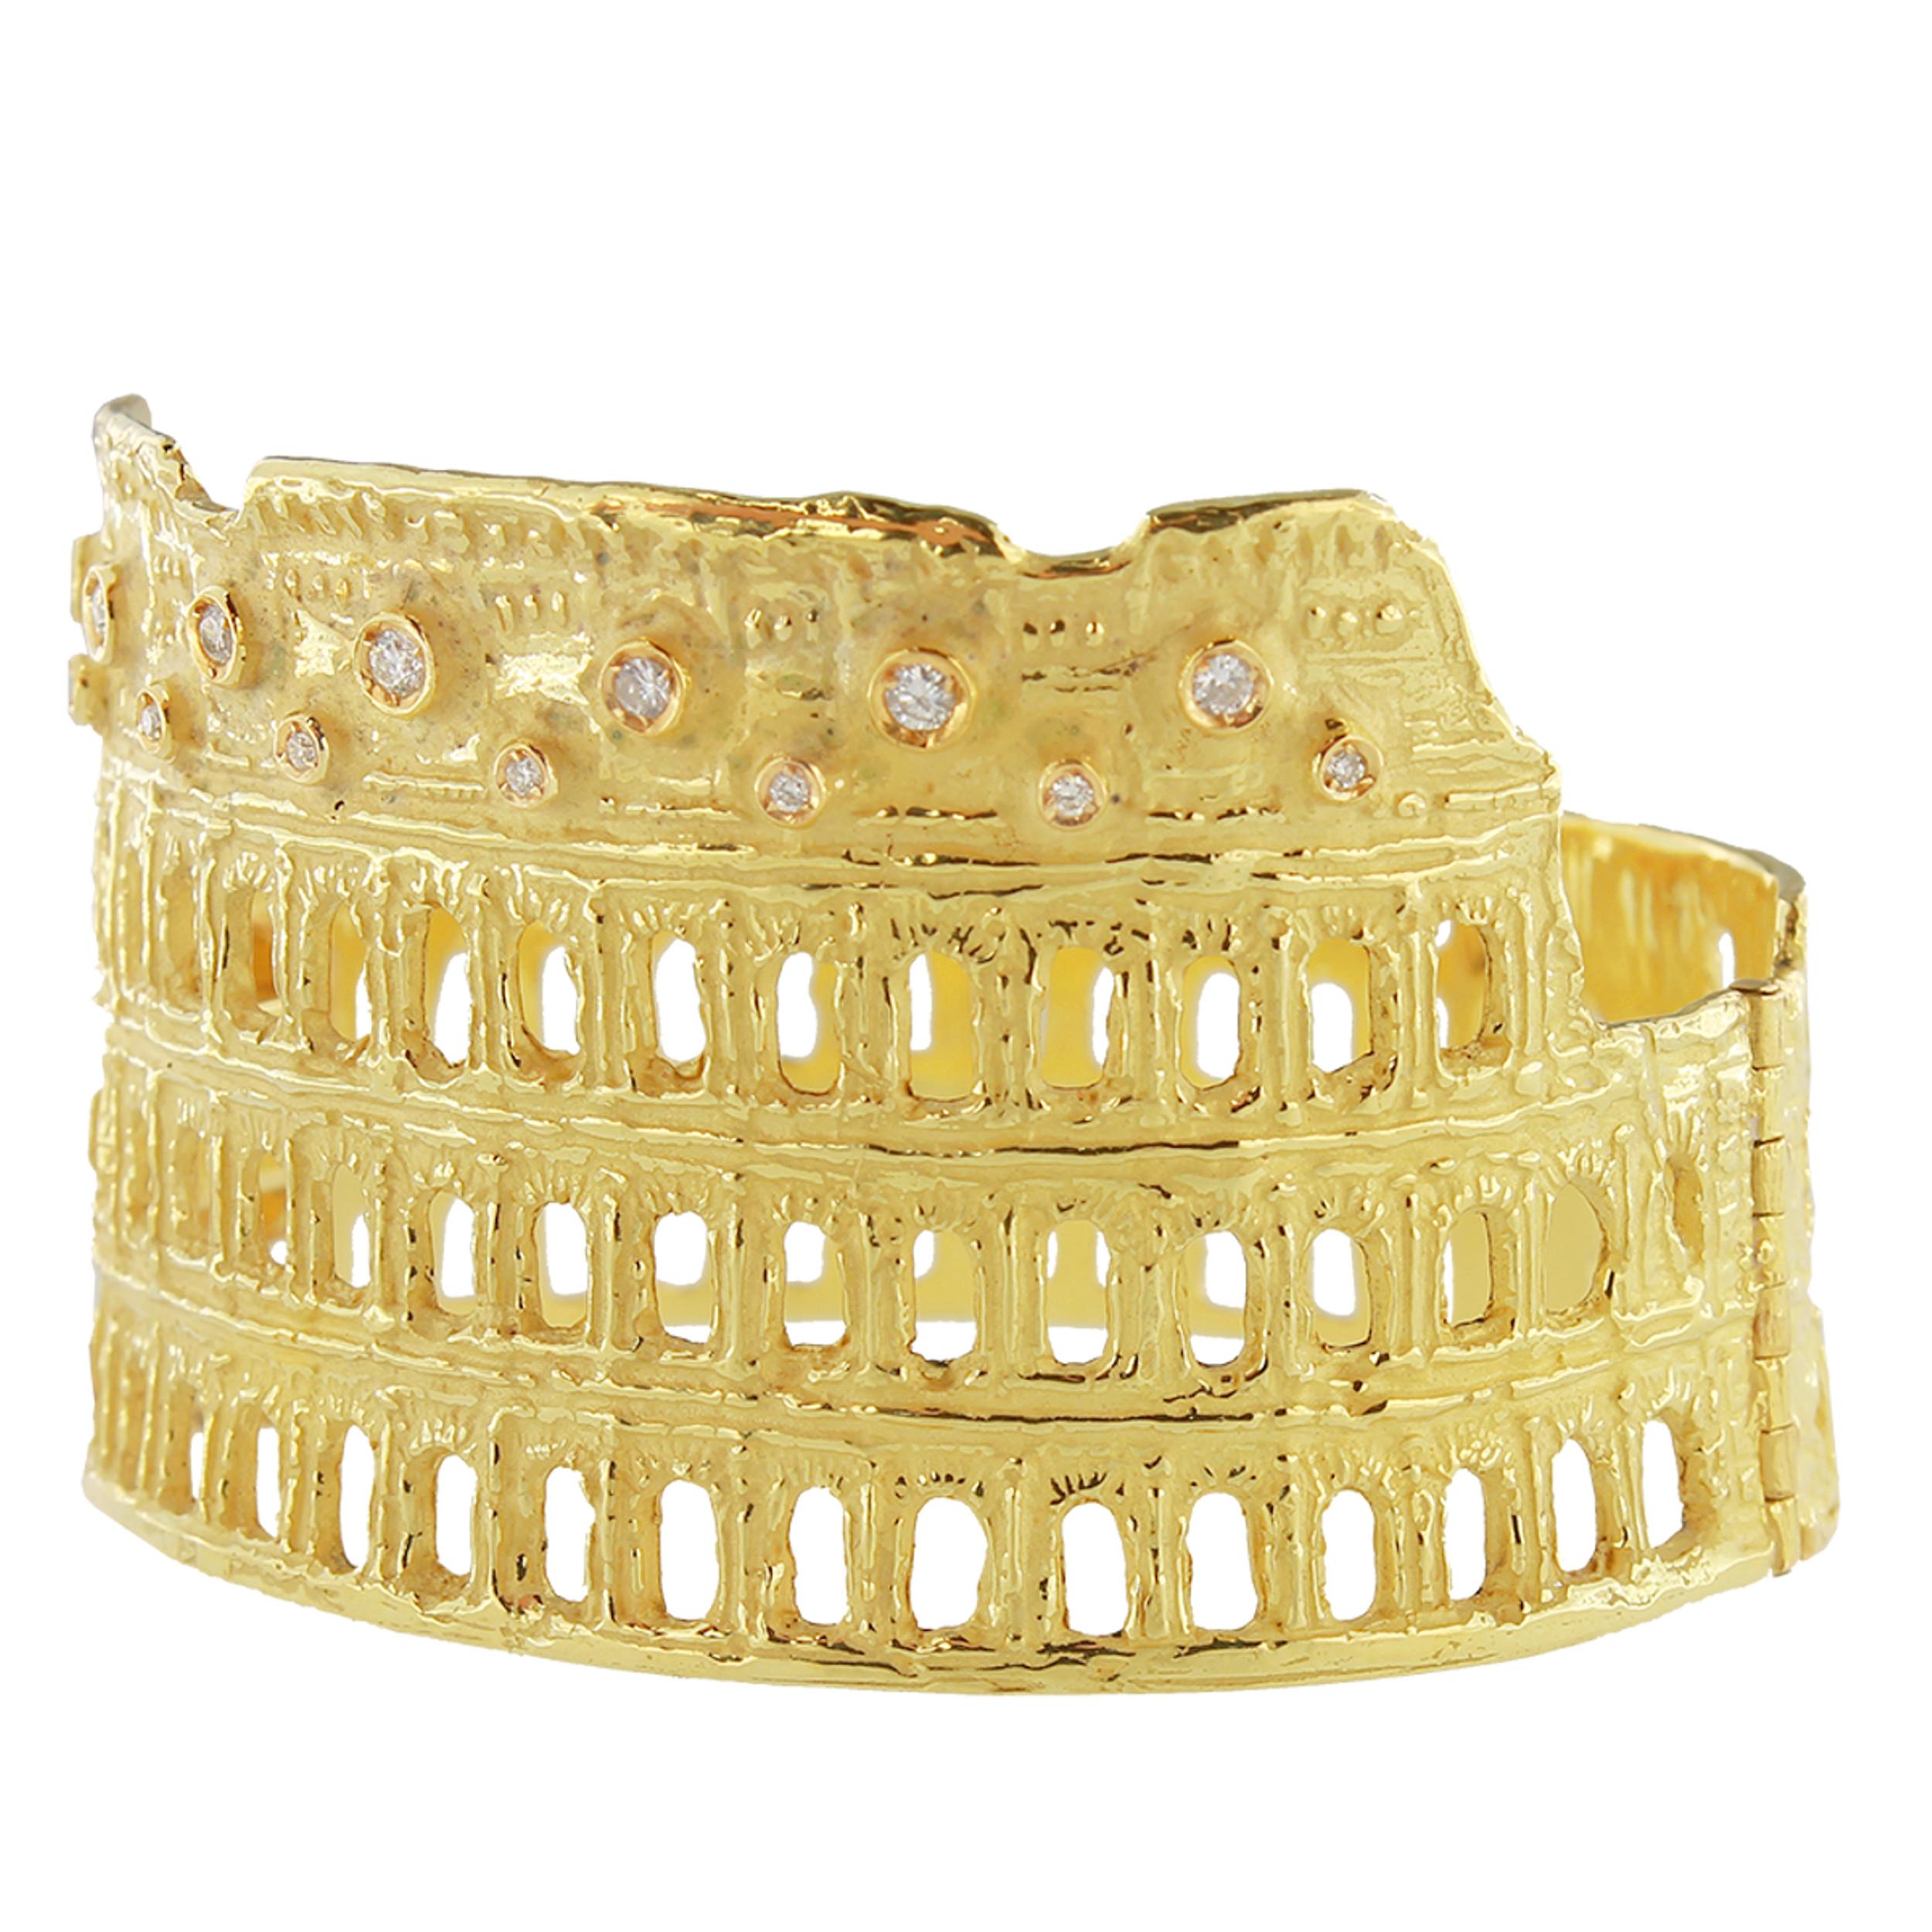 Unique Roman Colosseum Satin Yellow Gold and Diamonds Cuff Bracelet, from Sacchi’s Rome Collection, hand-crafted with lost-wax casting technique.

Lost-wax casting, one of the oldest techniques for creating jewelry, forms the basis of Sacchi's